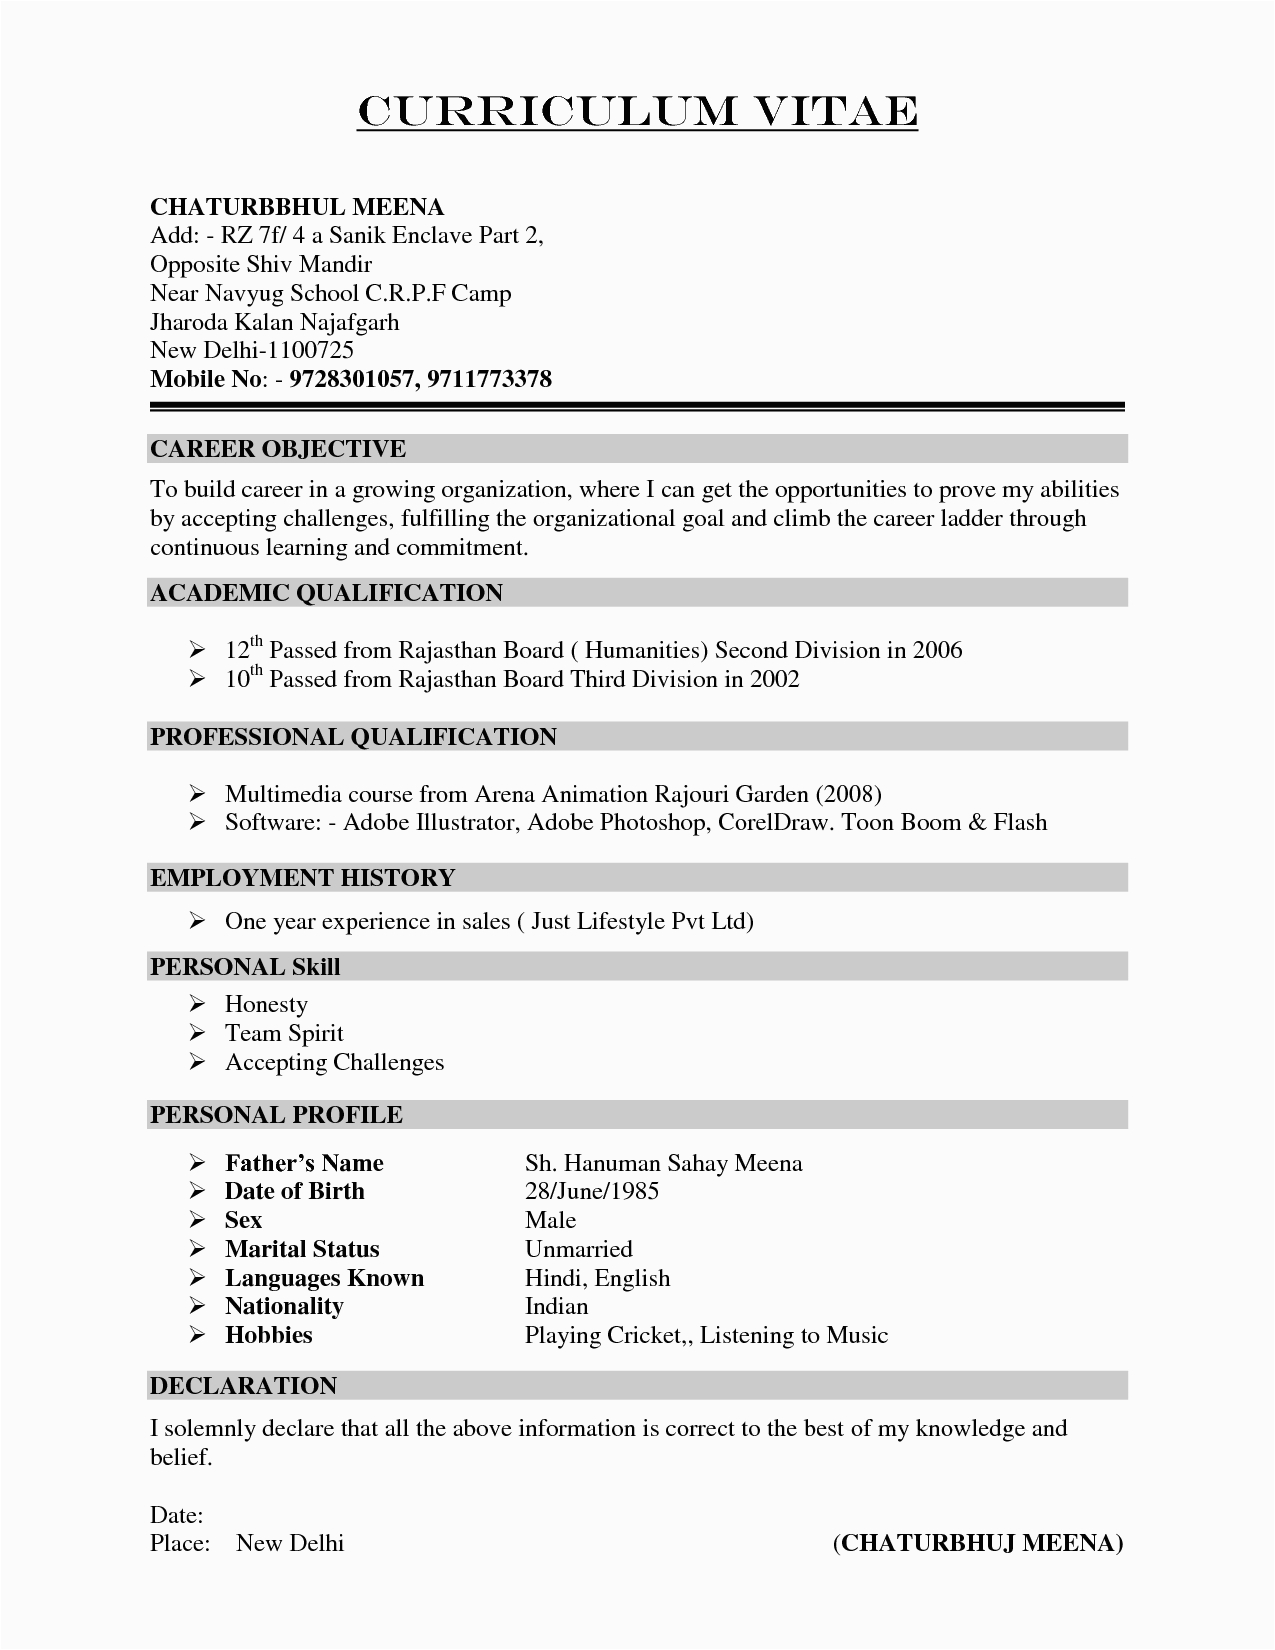 Sample Interests to Put On Resume Resume Examples Hobbies Resume Templates